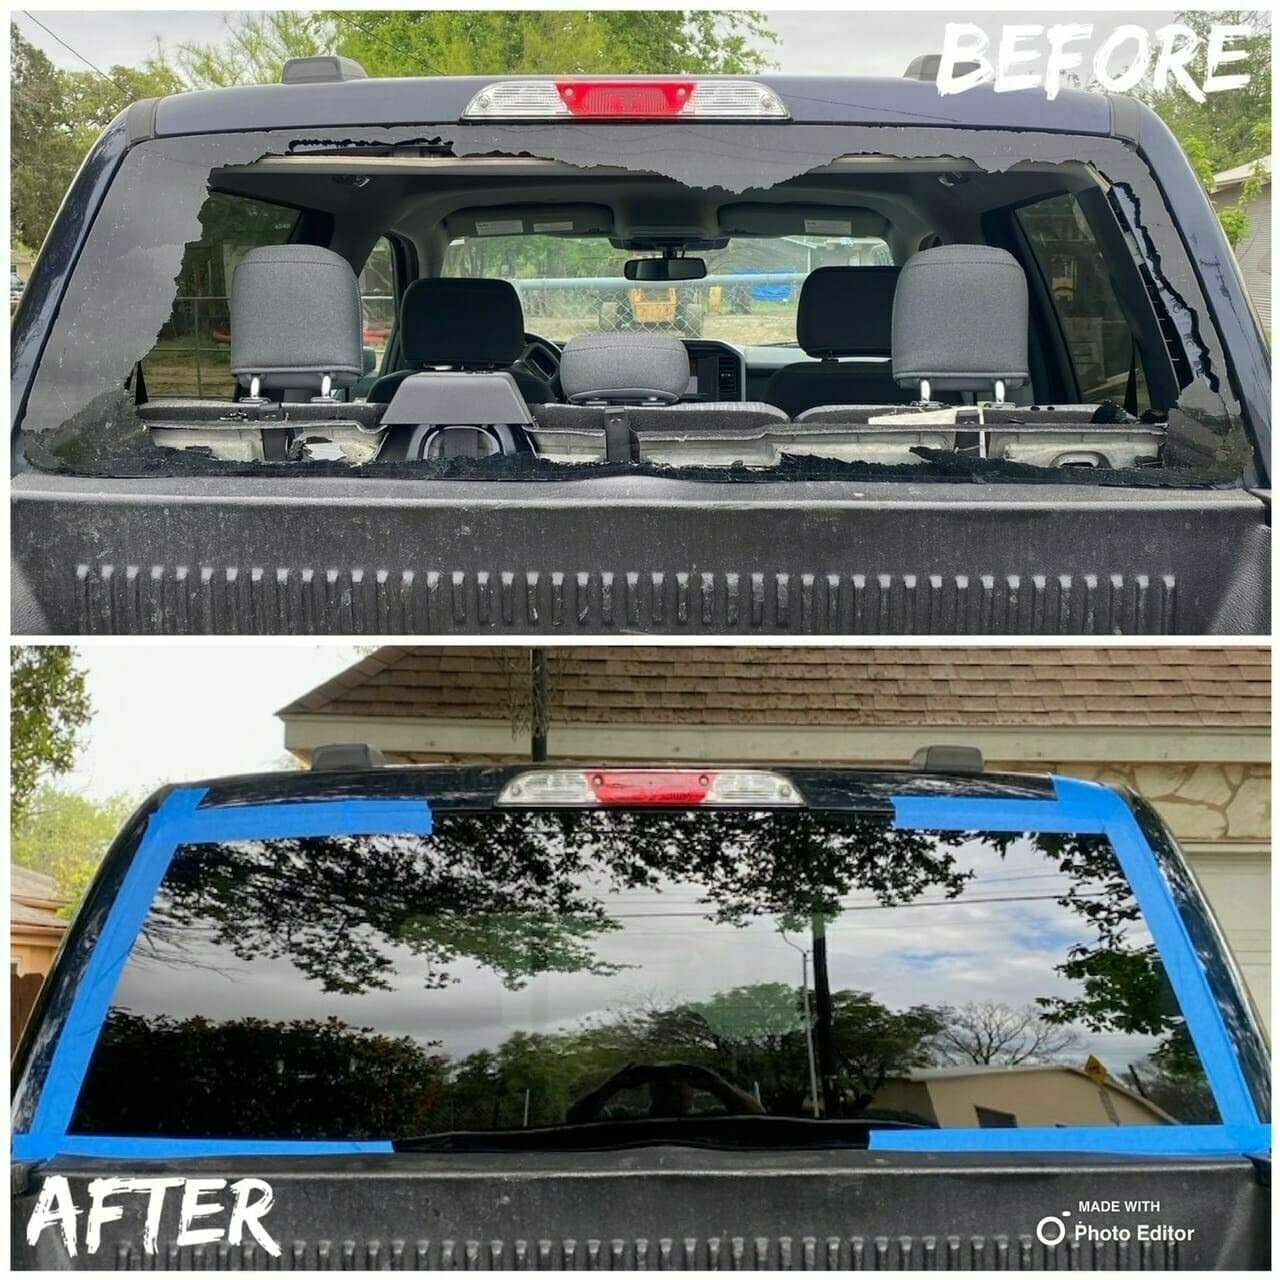 This split image displays the transformation of a pickup truck's rear windshield during a home auto glass appointment in Leon Valley, Texas. The top half of the image shows the completely smashed out rear windshield, while the bottom half reveals the expertly replaced 1-piece stationary factory privacy tinted windshield, restoring the vehicle to its original state.